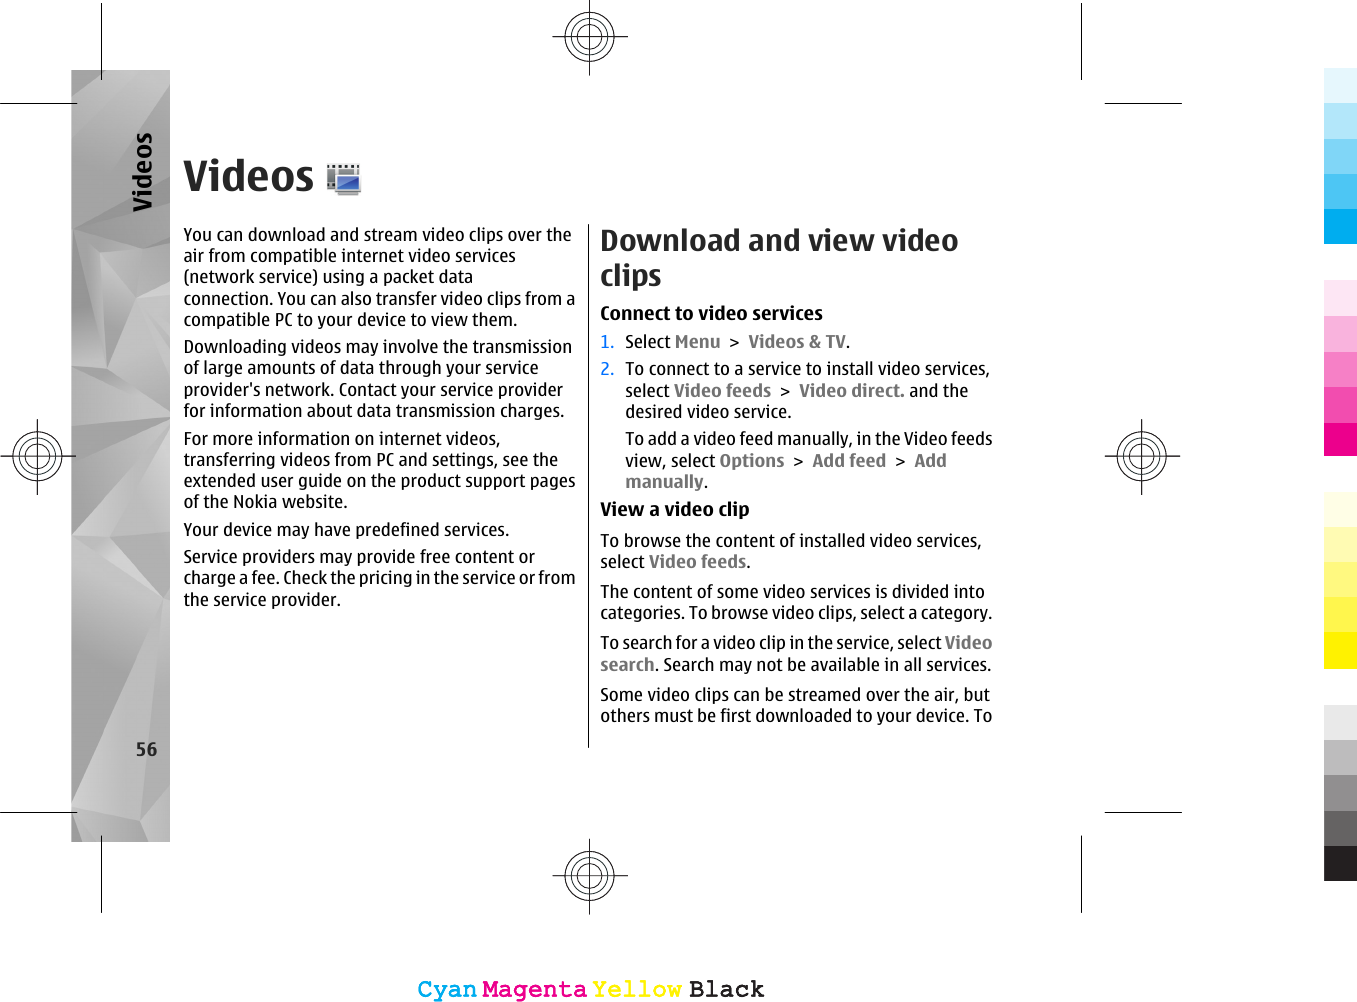 VideosYou can download and stream video clips over theair from compatible internet video services(network service) using a packet data connection. You can also transfer video clips from acompatible PC to your device to view them.Downloading videos may involve the transmissionof large amounts of data through your serviceprovider&apos;s network. Contact your service providerfor information about data transmission charges.For more information on internet videos,transferring videos from PC and settings, see theextended user guide on the product support pagesof the Nokia website.Your device may have predefined services.Service providers may provide free content orcharge a fee. Check the pricing in the service or fromthe service provider.Download and view videoclipsConnect to video services1. Select Menu &gt; Videos &amp; TV.2. To connect to a service to install video services,select Video feeds &gt; Video direct. and thedesired video service.To add a video feed manually, in the Video feedsview, select Options &gt; Add feed &gt; Addmanually.View a video clipTo browse the content of installed video services,select Video feeds.The content of some video services is divided intocategories. To browse video clips, select a category.To search for a video clip in the service, select Videosearch. Search may not be available in all services.Some video clips can be streamed over the air, butothers must be first downloaded to your device. To56VideosCyanCyanMagentaMagentaYellowYellowBlackBlackCyanCyanMagentaMagentaYellowYellowBlackBlack